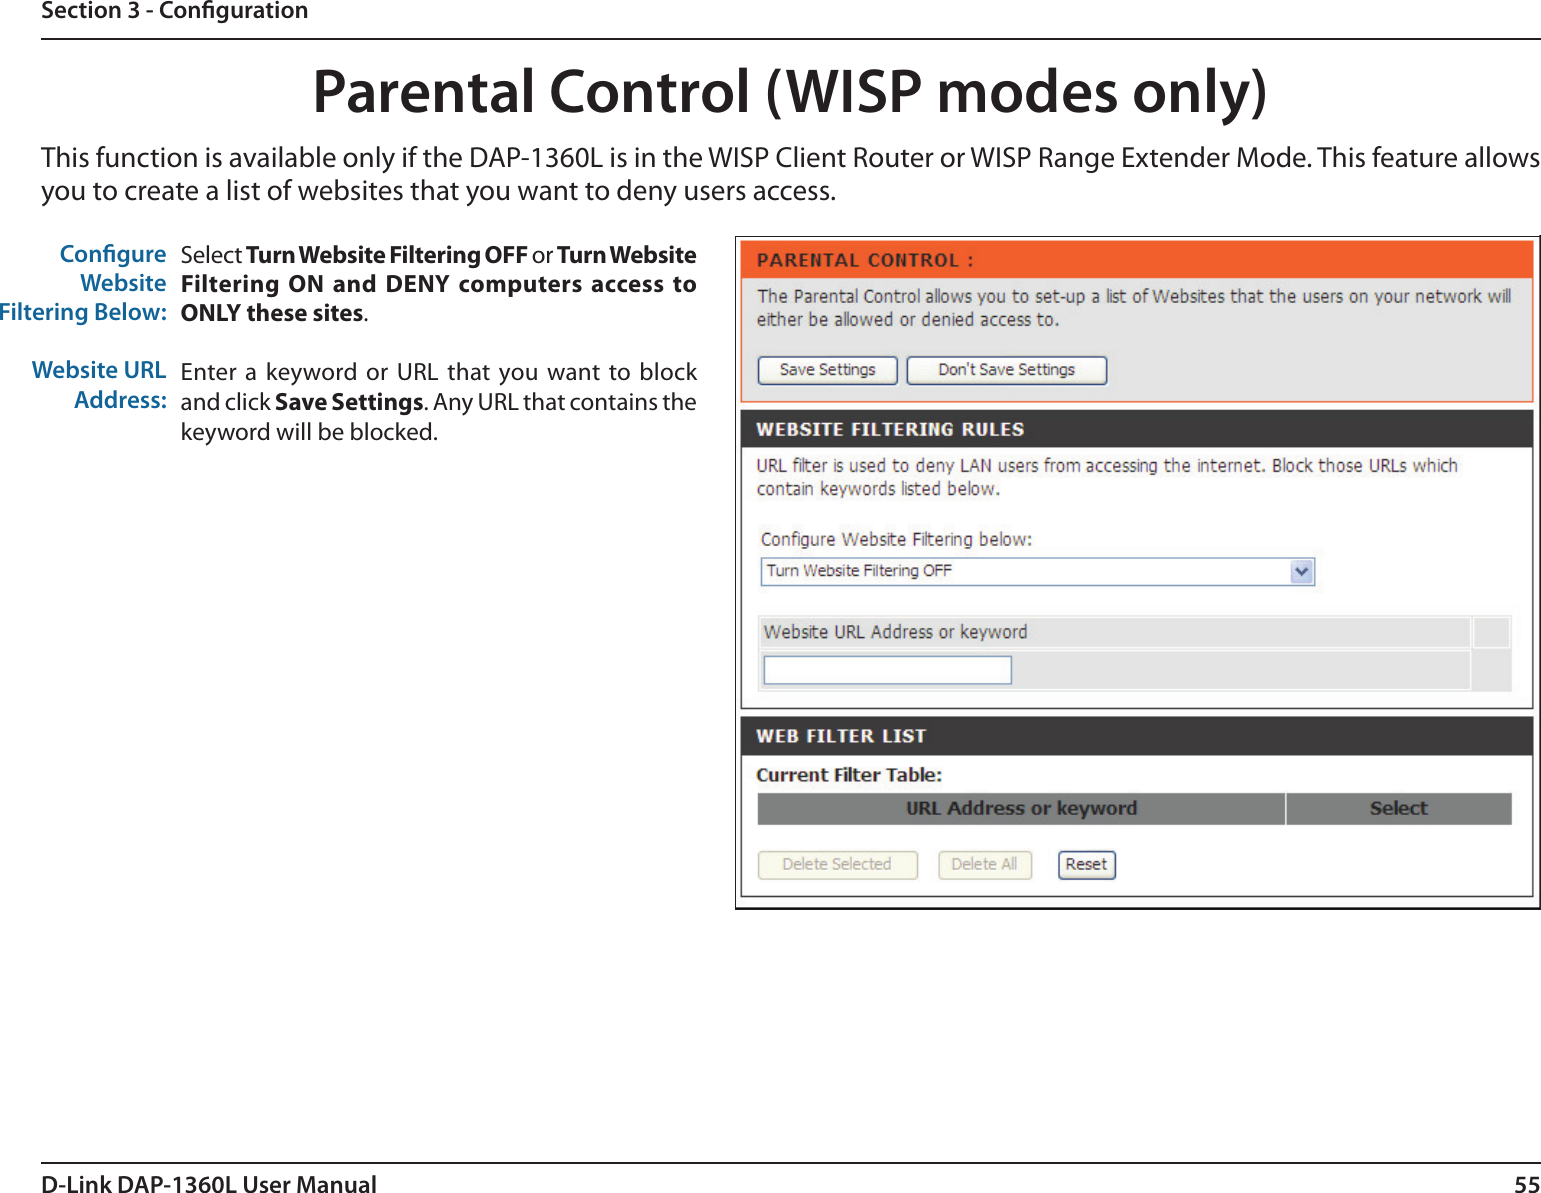 55D-Link DAP-1360L User ManualSection 3 - CongurationParental Control (WISP modes only)Select Turn Website Filtering OFF or Turn Website Filtering ON  and DENY  computers  access  to ONLY these sites. Enter  a keyword or  URL that you want to  block and click Save Settings. Any URL that contains the keyword will be blocked. Congure WebsiteFiltering Below:Website URLAddress:This function is available only if the DAP-1360L is in the WISP Client Router or WISP Range Extender Mode. This feature allows you to create a list of websites that you want to deny users access.